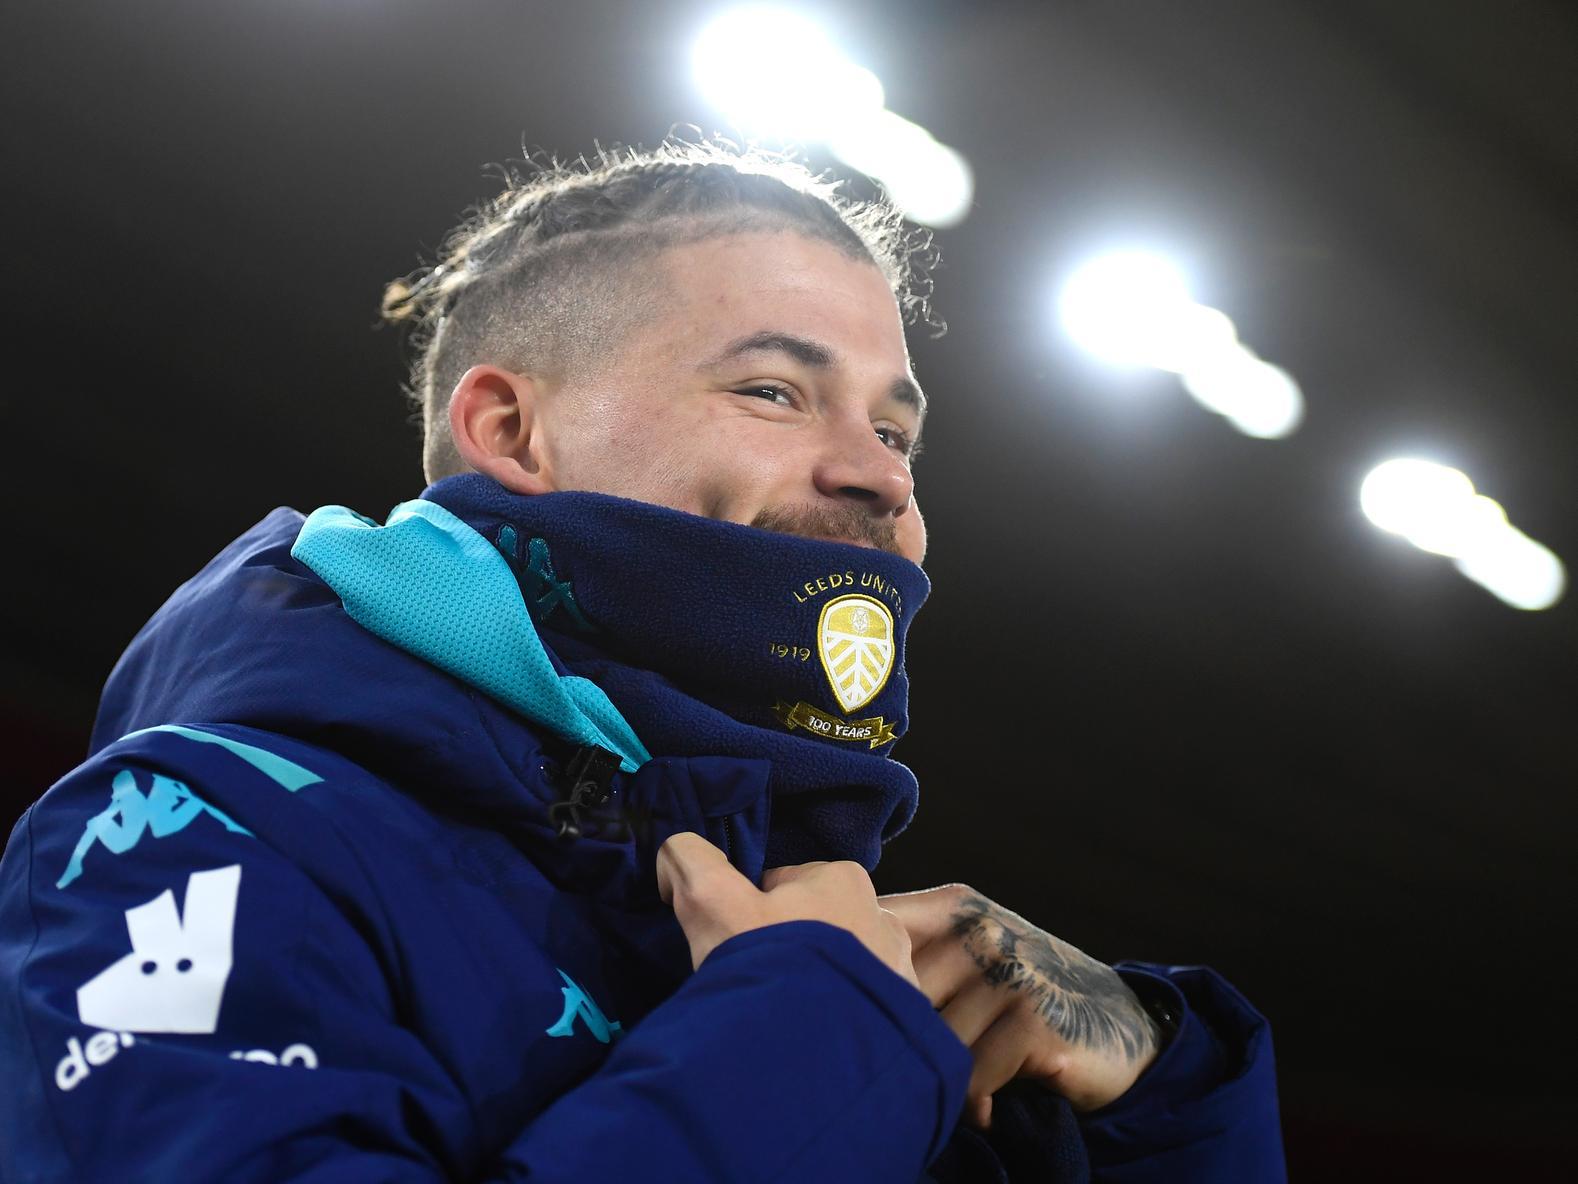 Pundit Michael Brown has claimed that Leeds United's star midfielder Kalvin Phillips will be fully focused on getting the club promoted this season, despite being repeatedly linked with a move to Manchester United. (Daily Express)